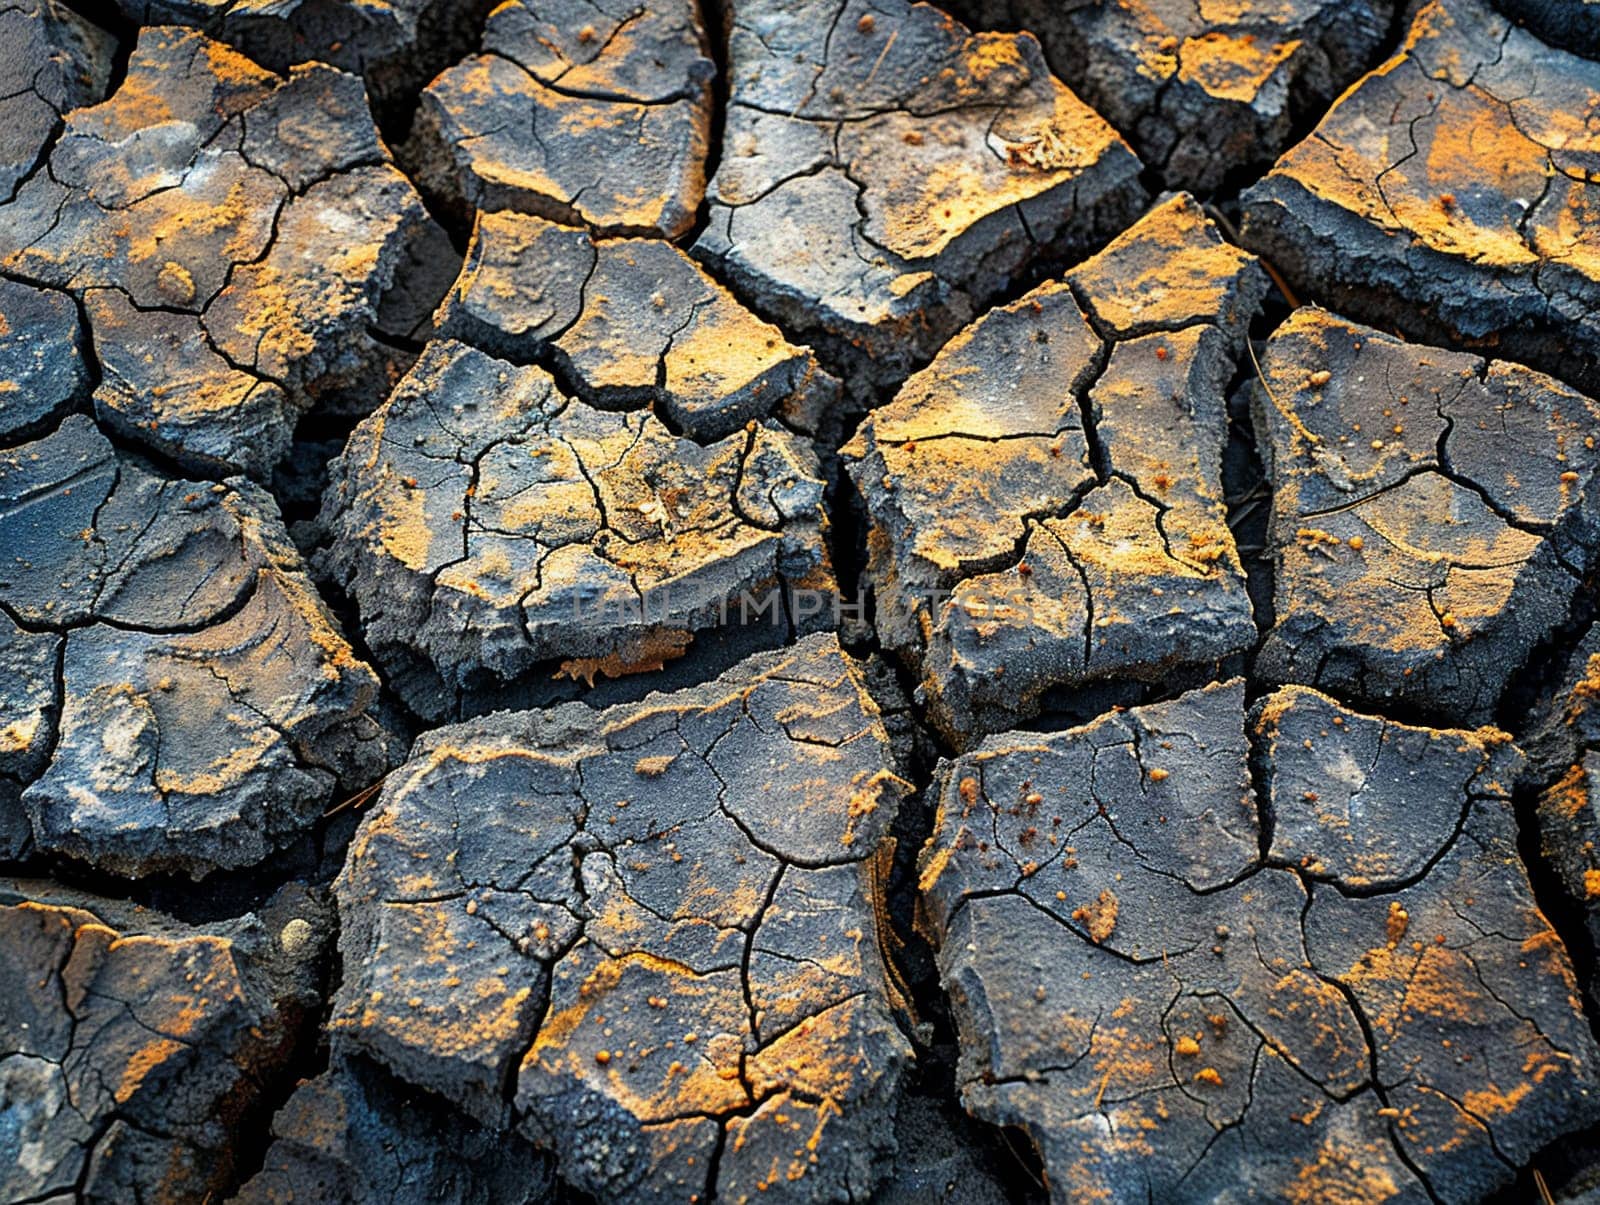 Cracked dry earth texture in desert, representing drought and environmental themes.